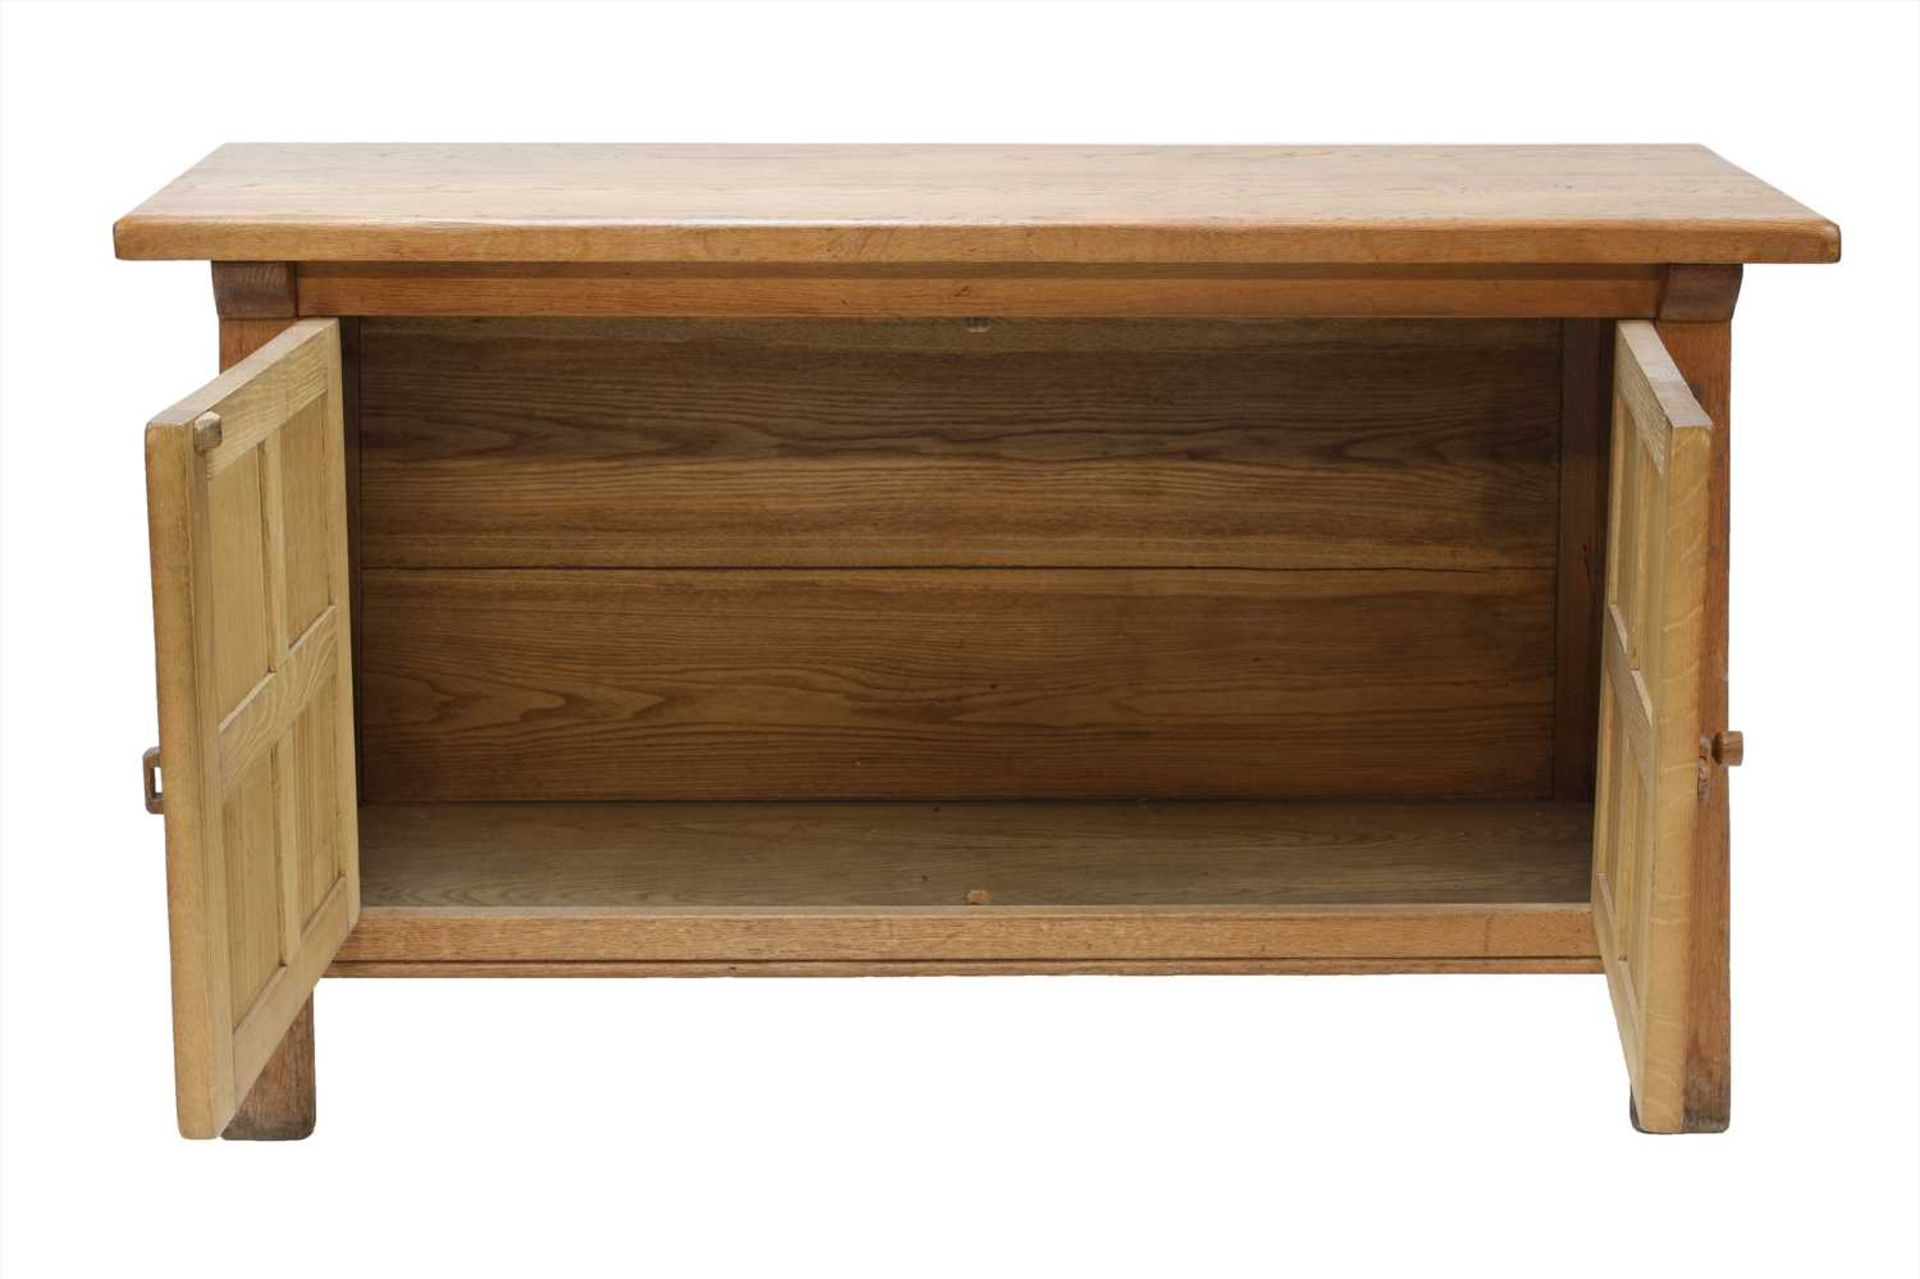 An Arts and Crafts oak sideboard, - Image 2 of 2